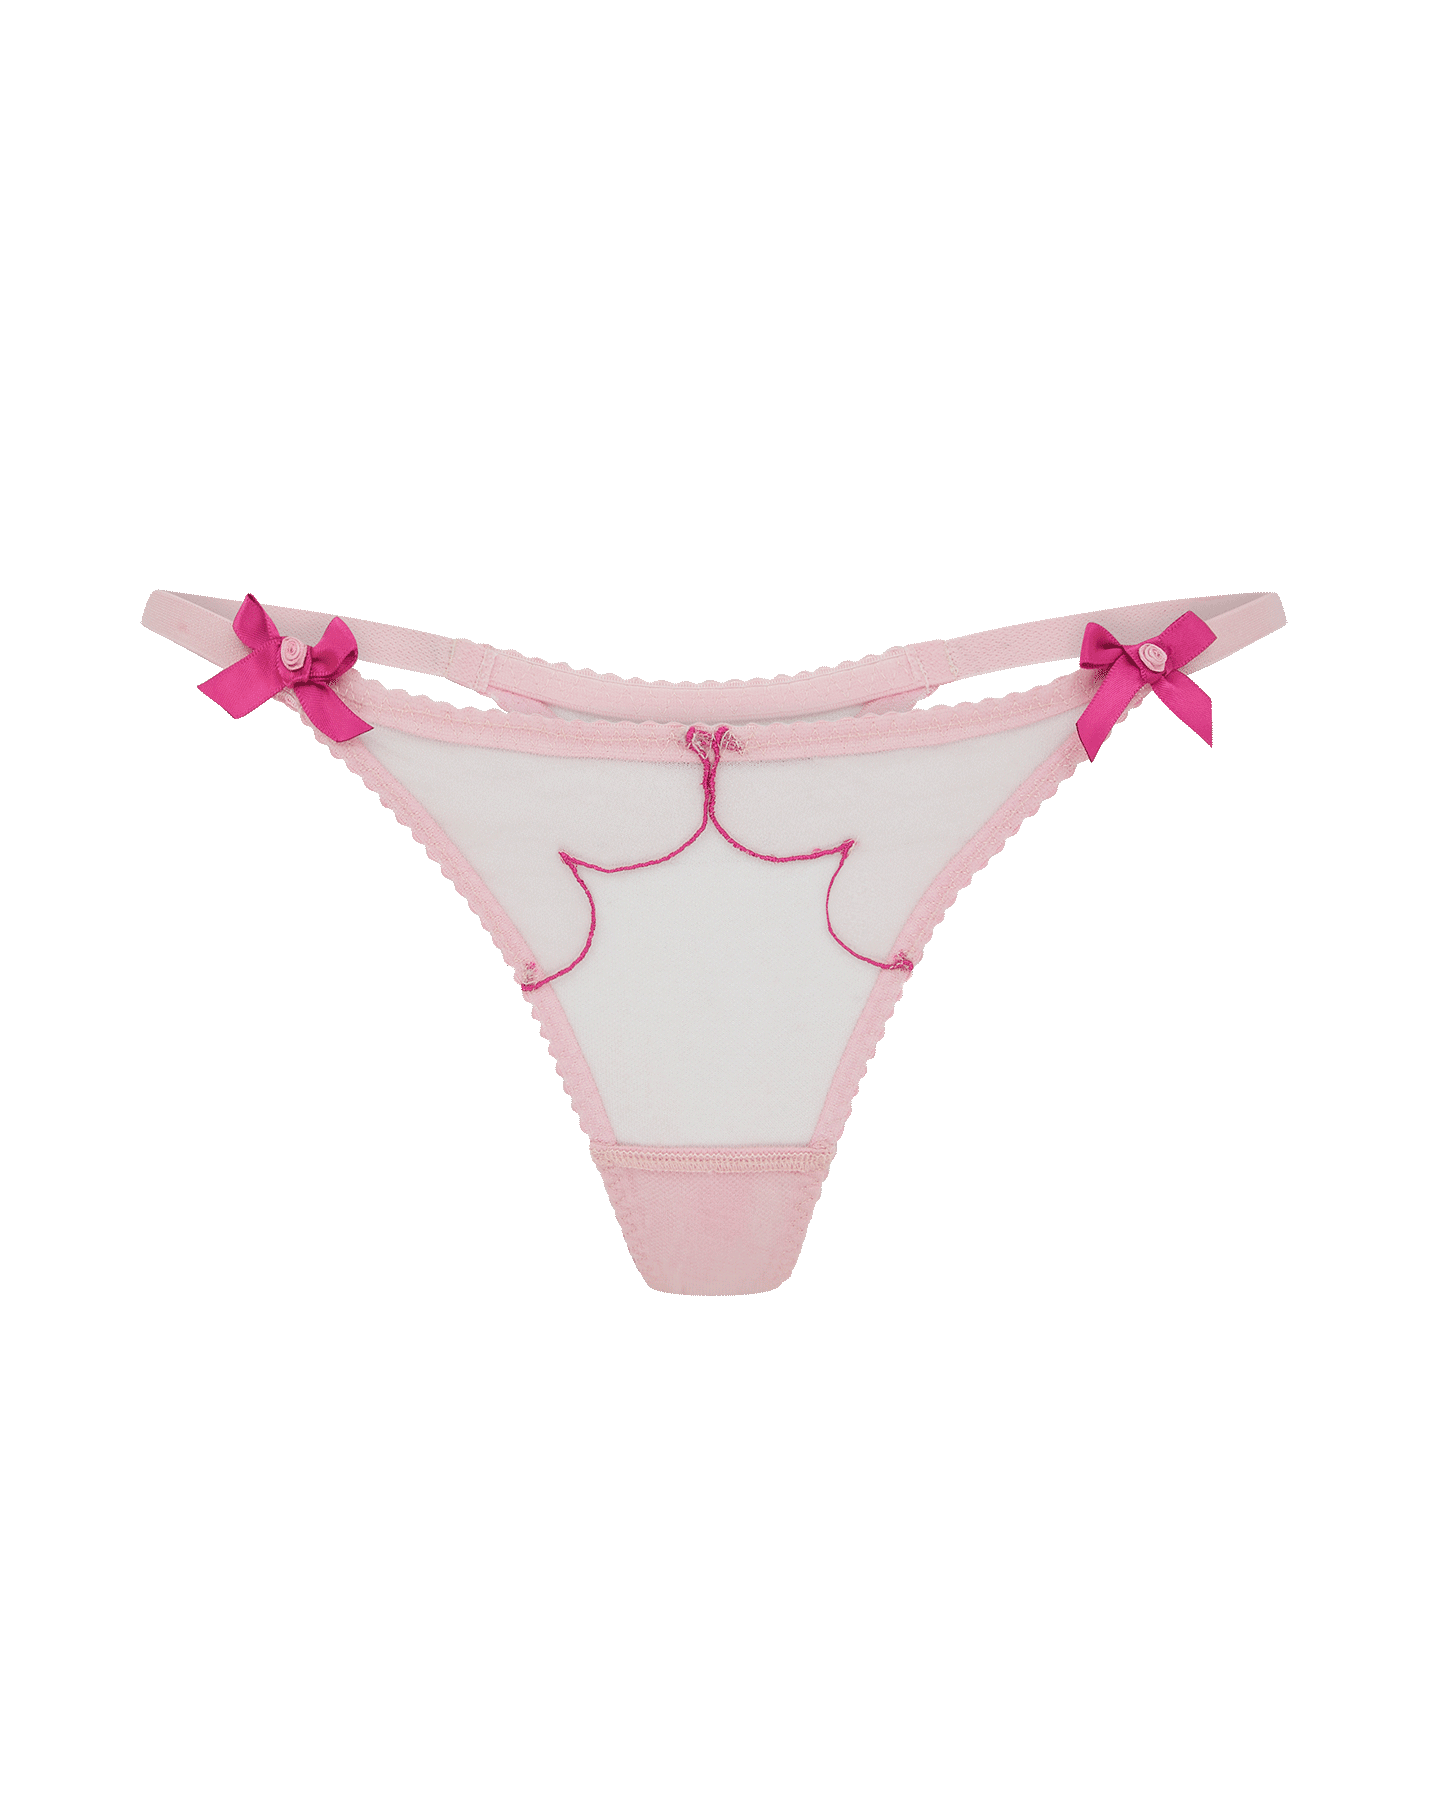 Lorna Thong in Baby Pink/Magenta | By Agent Provocateur